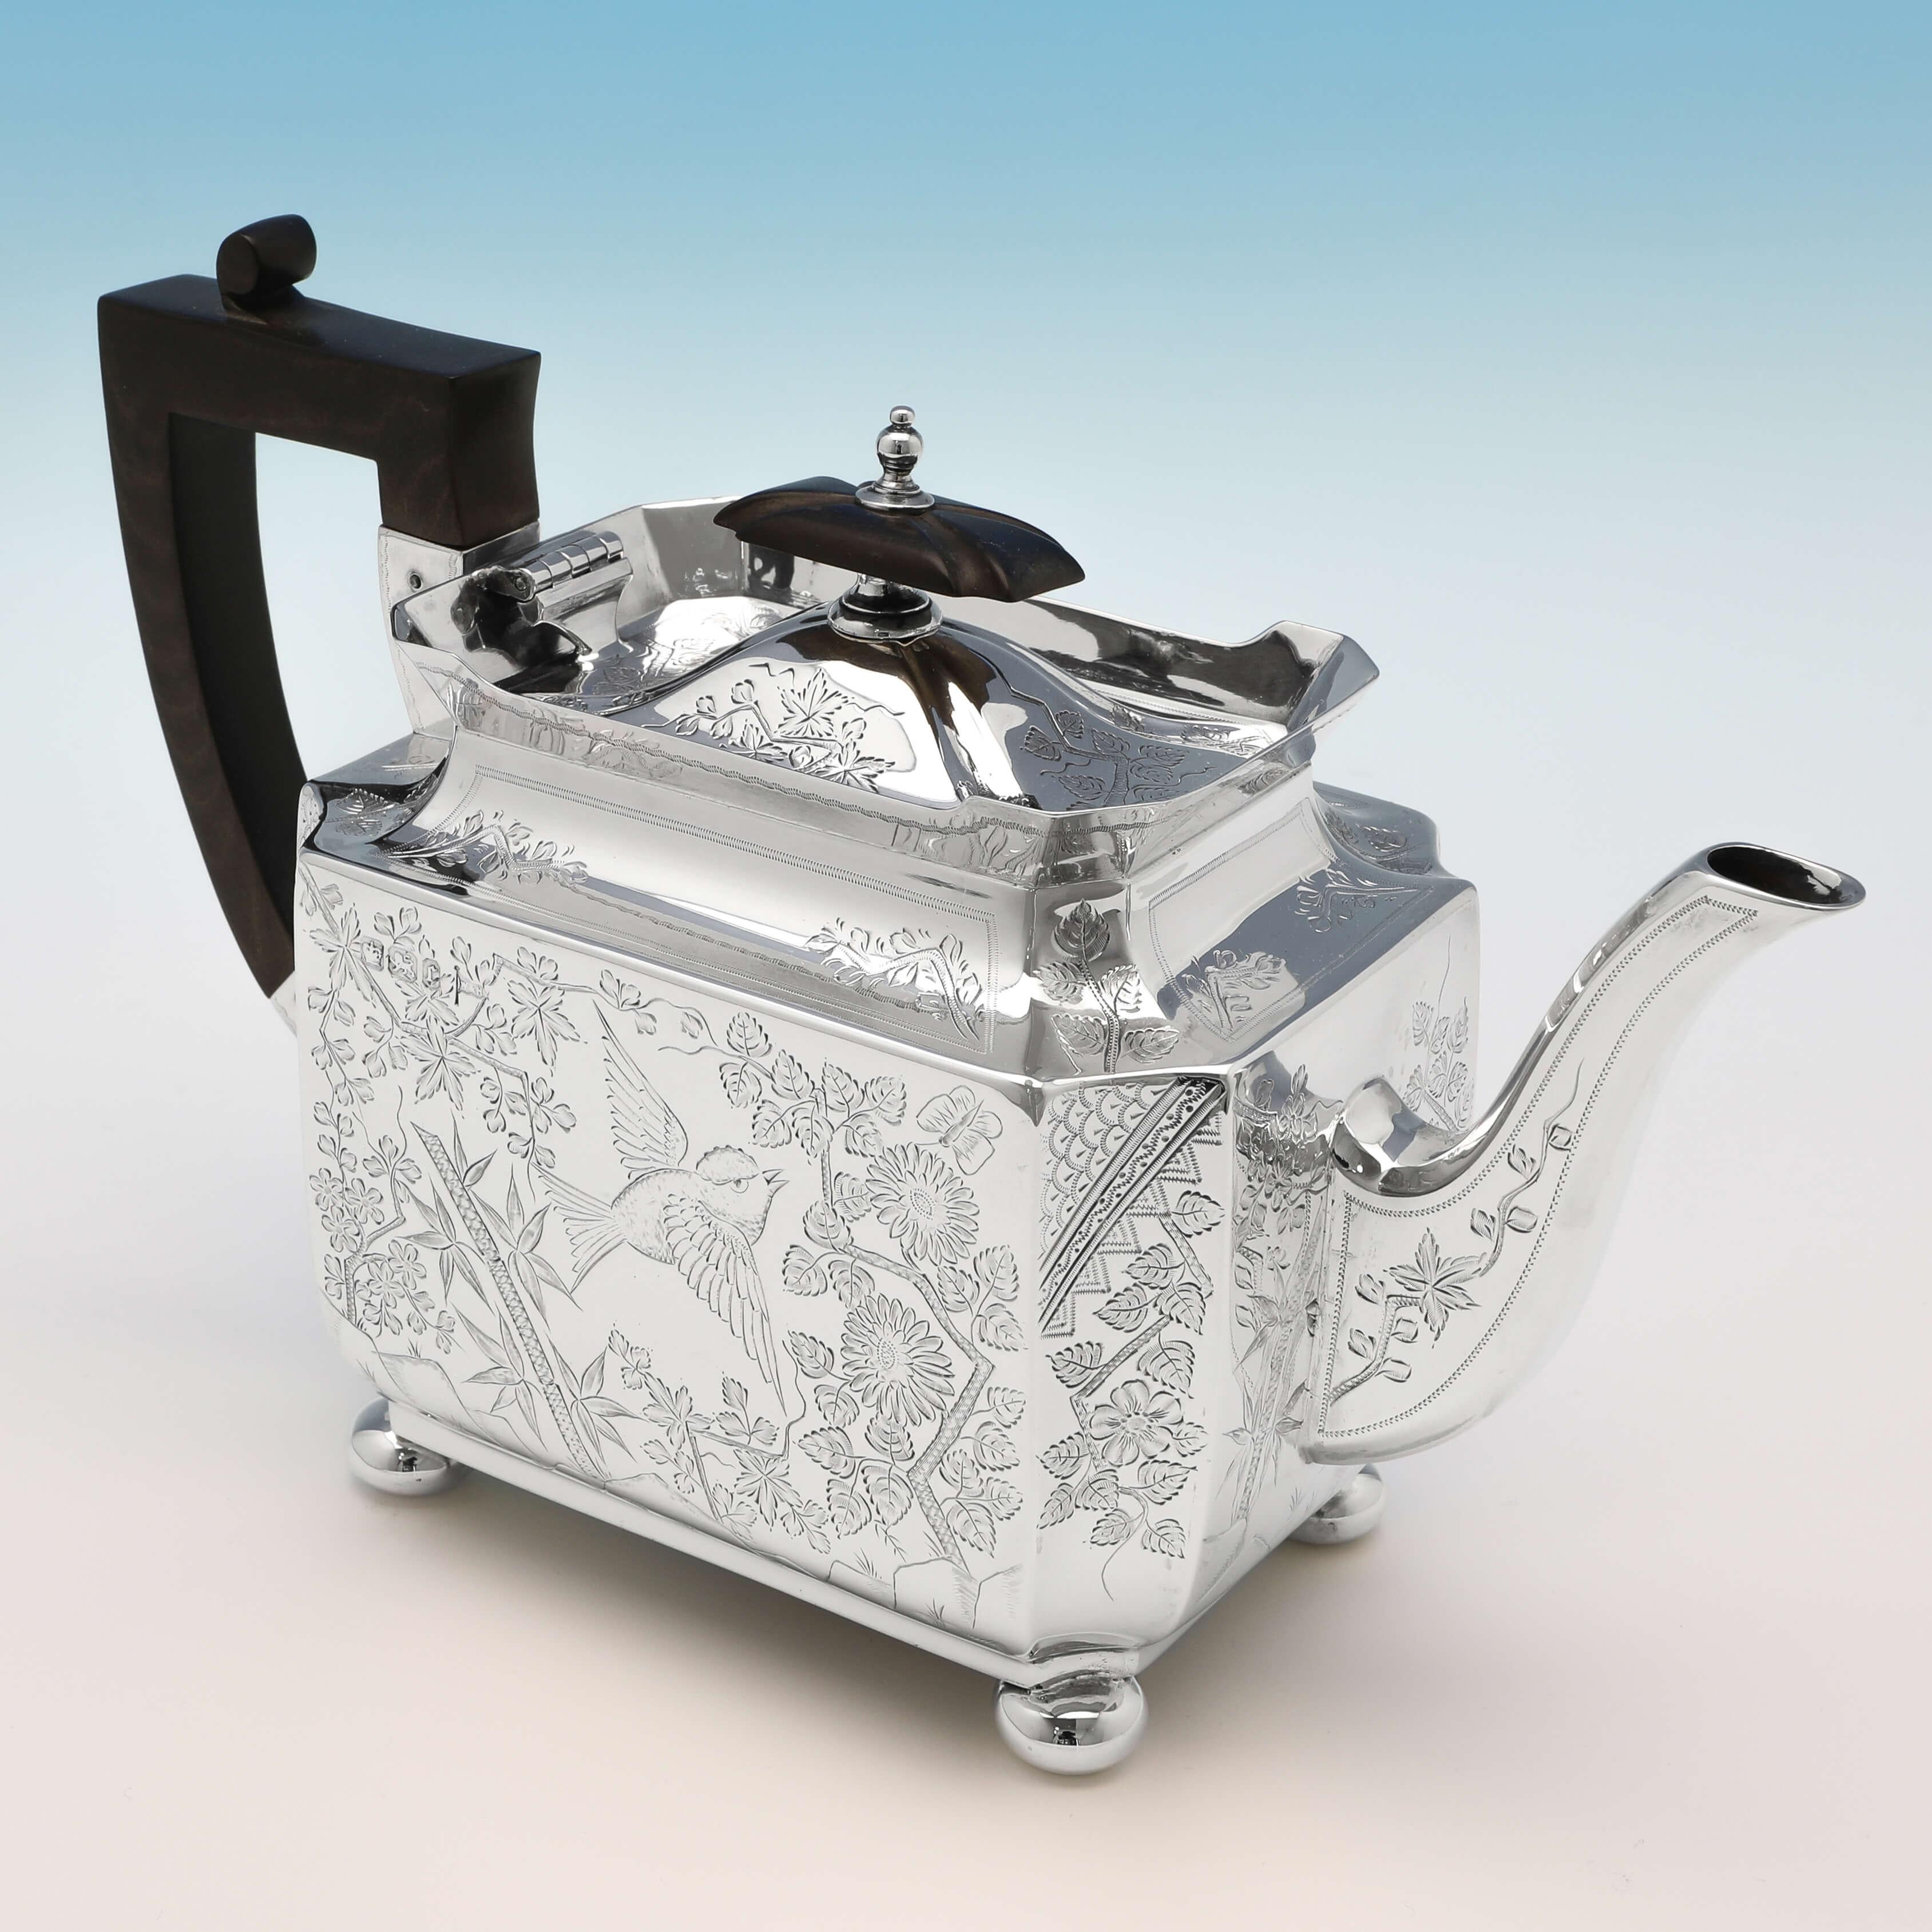 Hallmarked in Sheffield in 1895 by Walker & Hall, this exquisite, Victorian, antique sterling silver 3 piece tea set, is in the Aesthetic style, featuring wonderfully engraved decoration throughout. The teapot measures 6.25